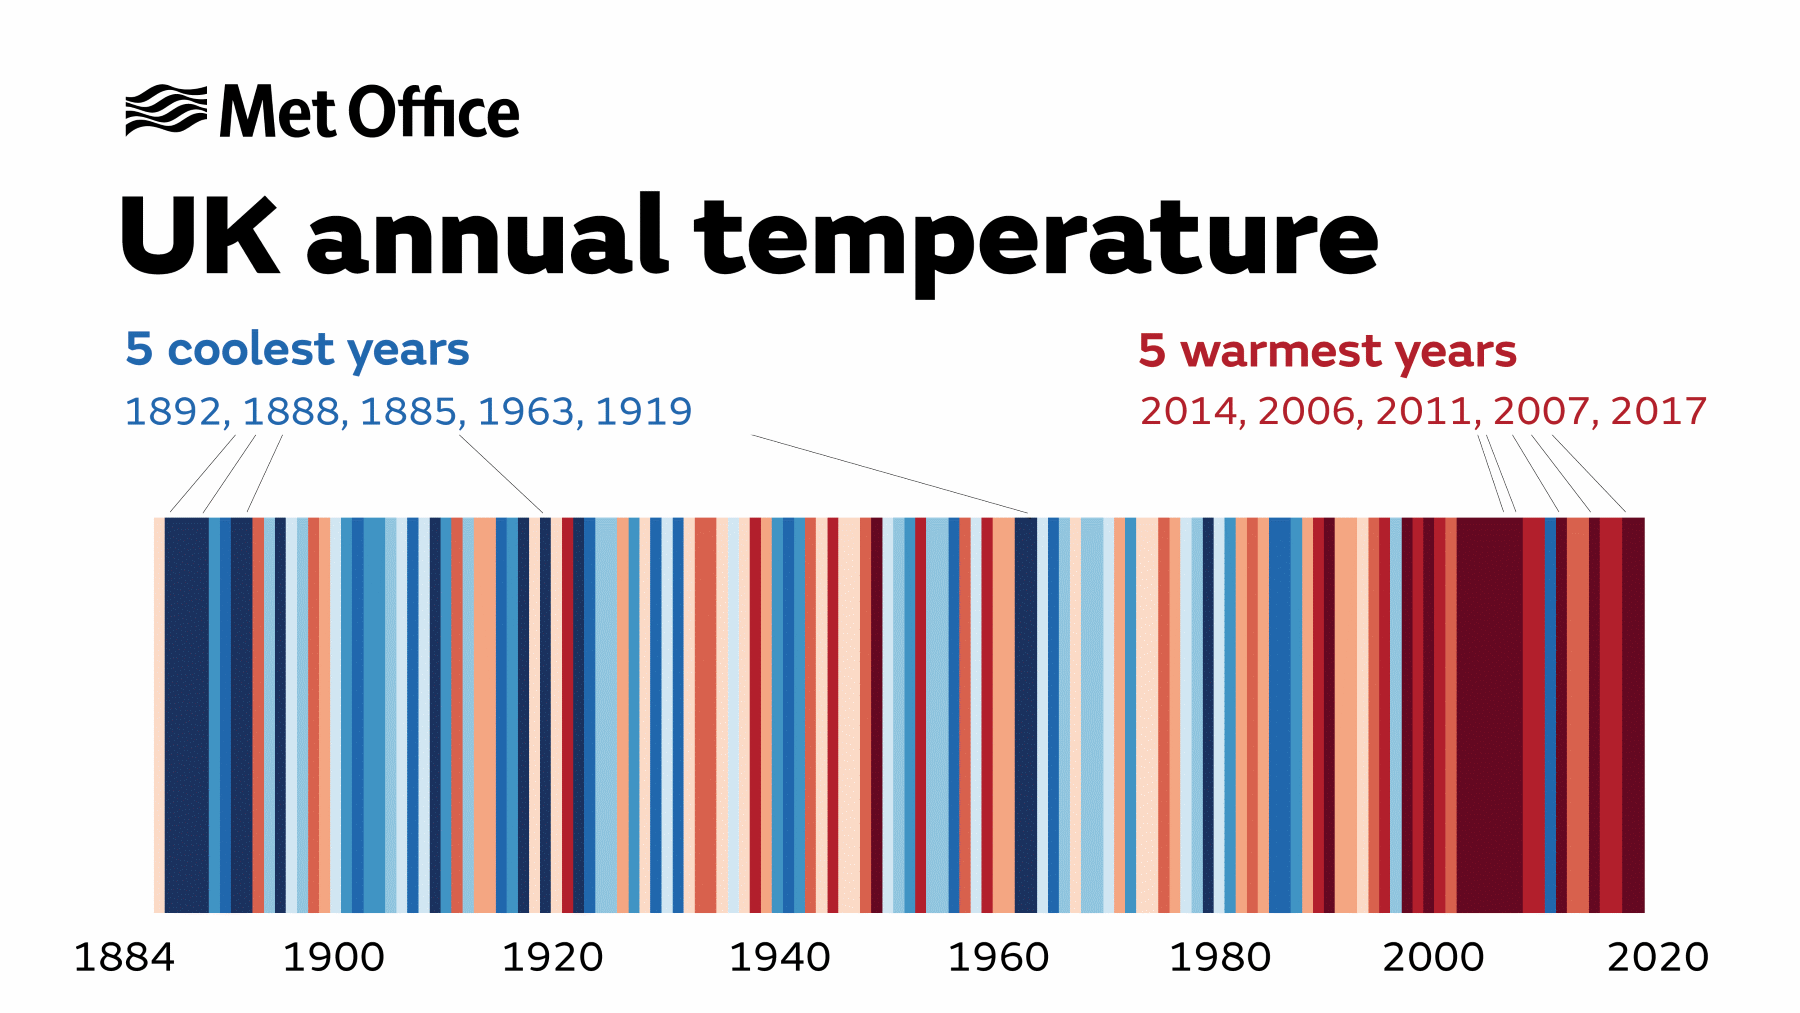 Diagram showing the warmest years in the UK. The 5 coolest years occur in 1885, 1888, 1892, 1919 and 1963, with the 5 warmest years in 2006, 2007, 2011, 2014 and 2017.